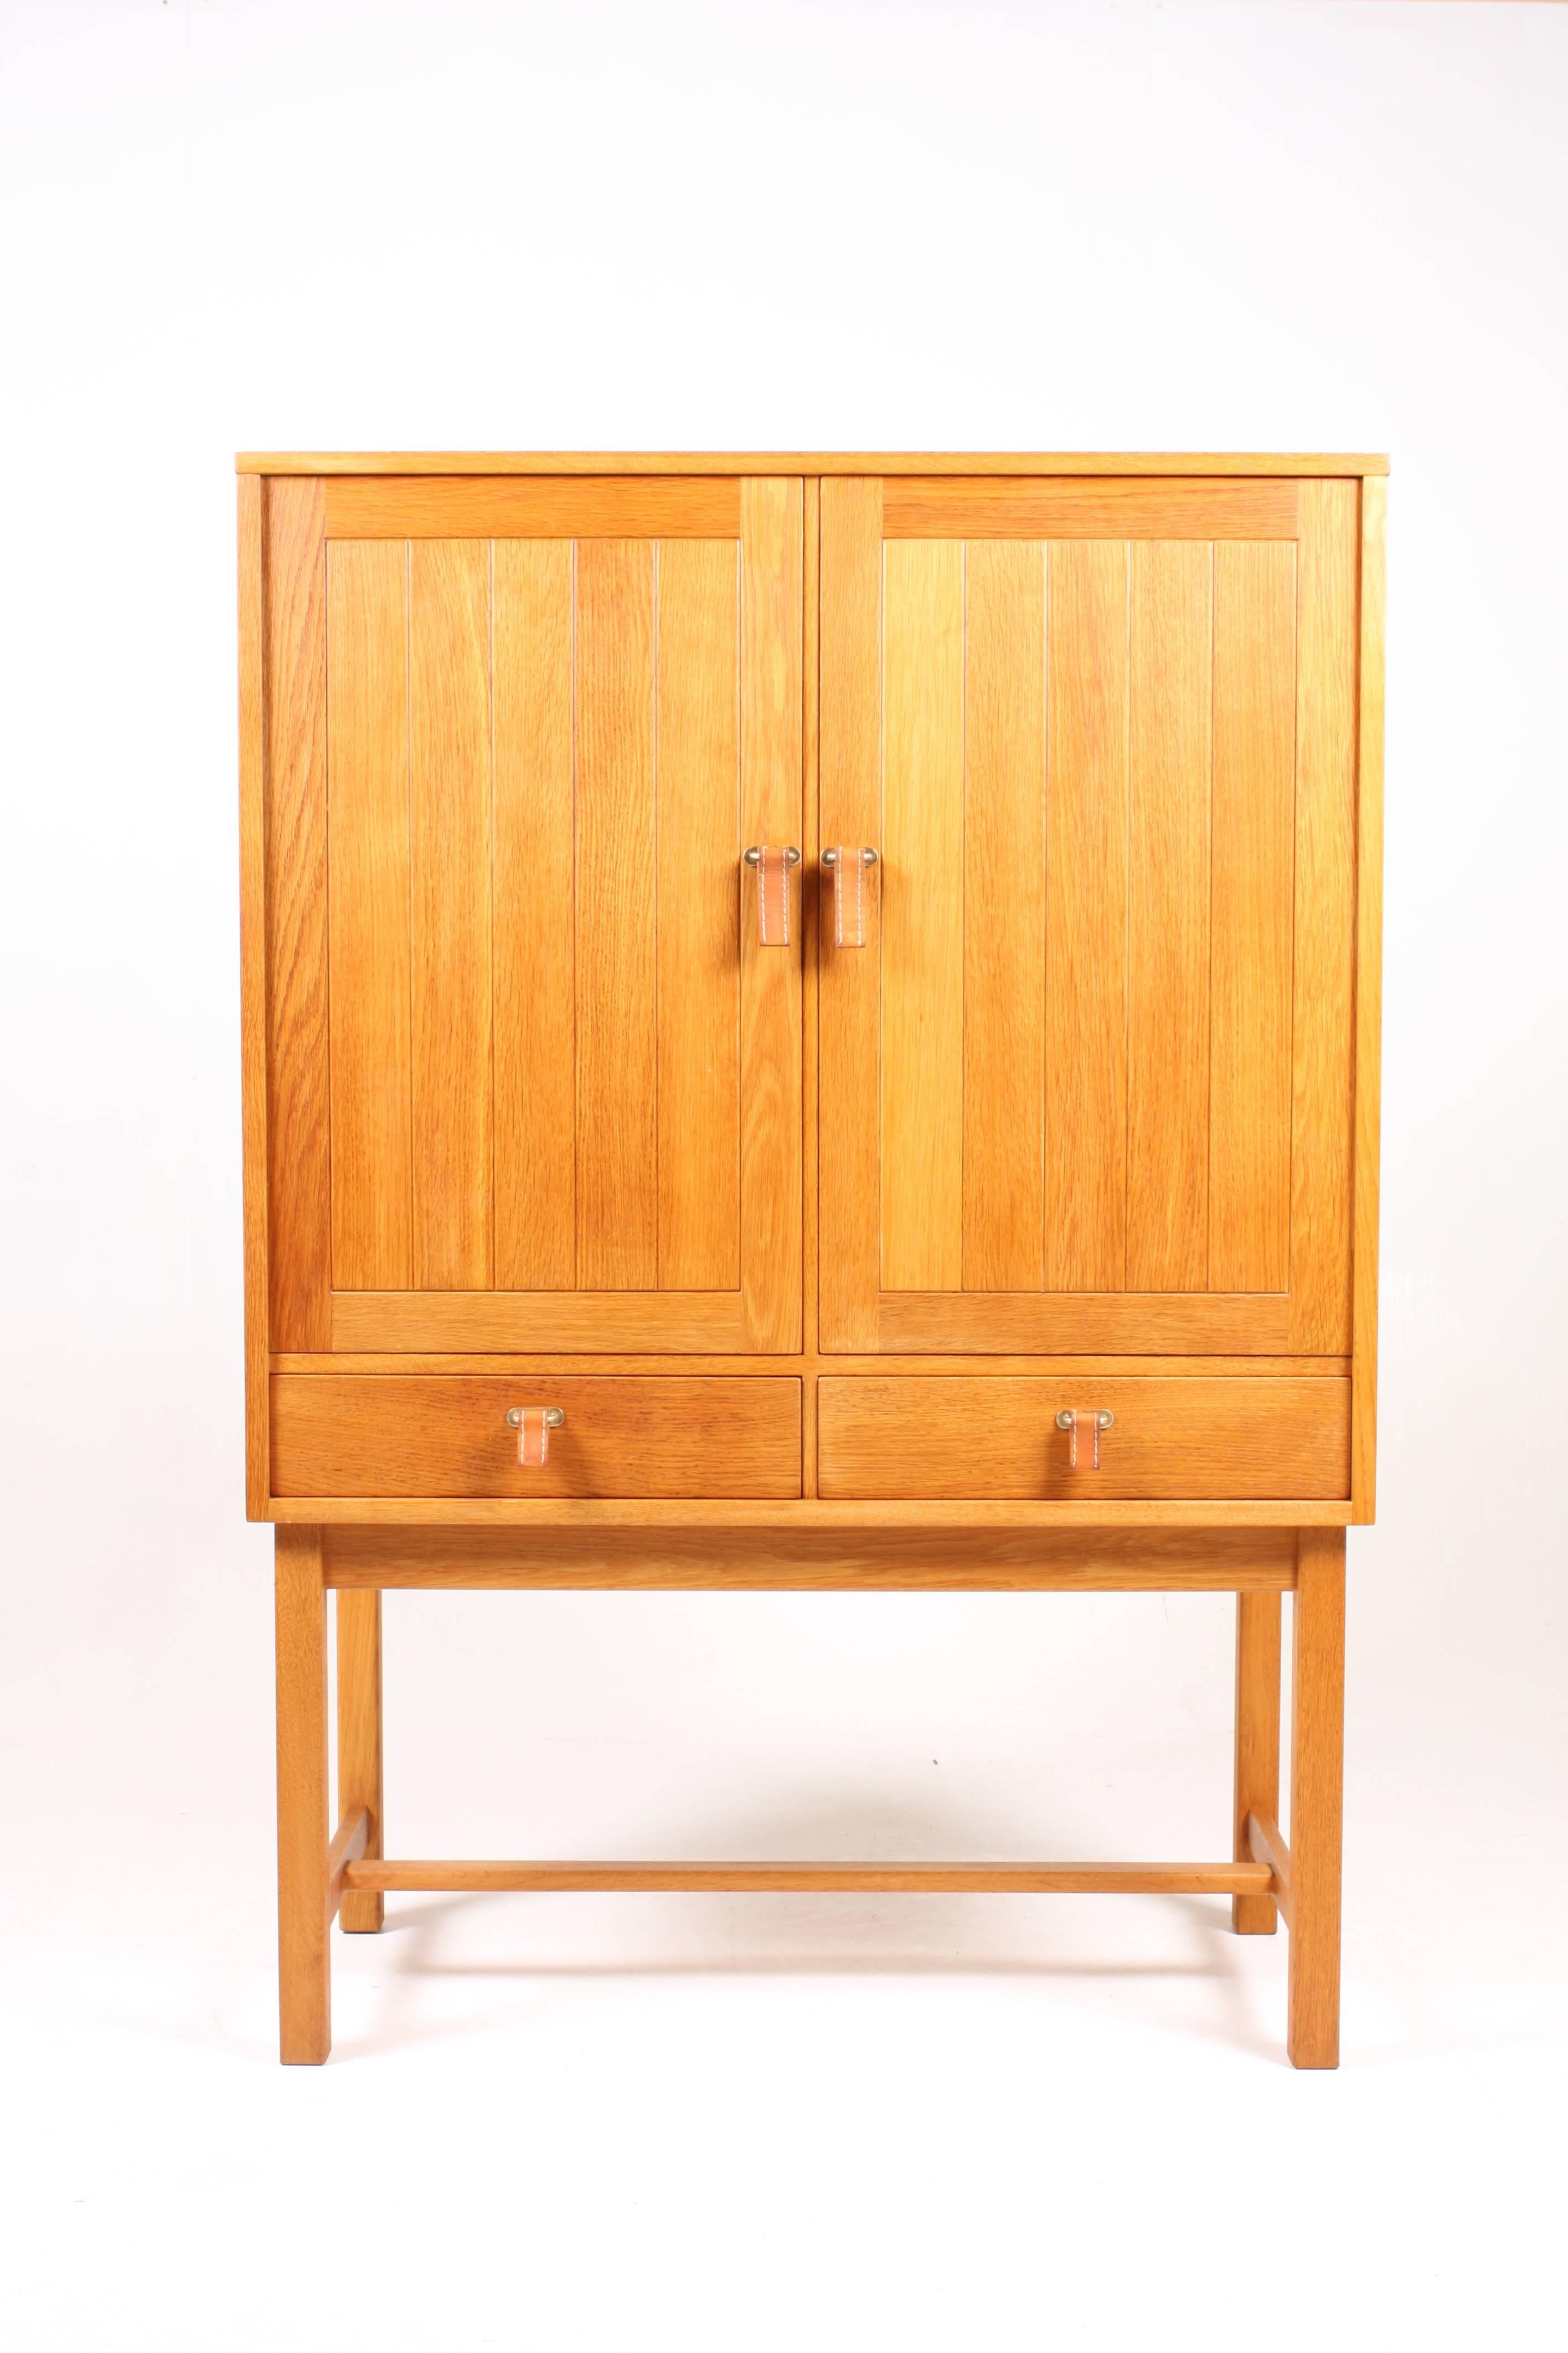 Pair of stunning cabinets in solid waxed oak, hard ware in brass and patinated leather handles. Nice and useful interior with drawers and shelves. Designed by MAA Kurt Ostervig for K.P. furniture in the 1960s. Great original condition.